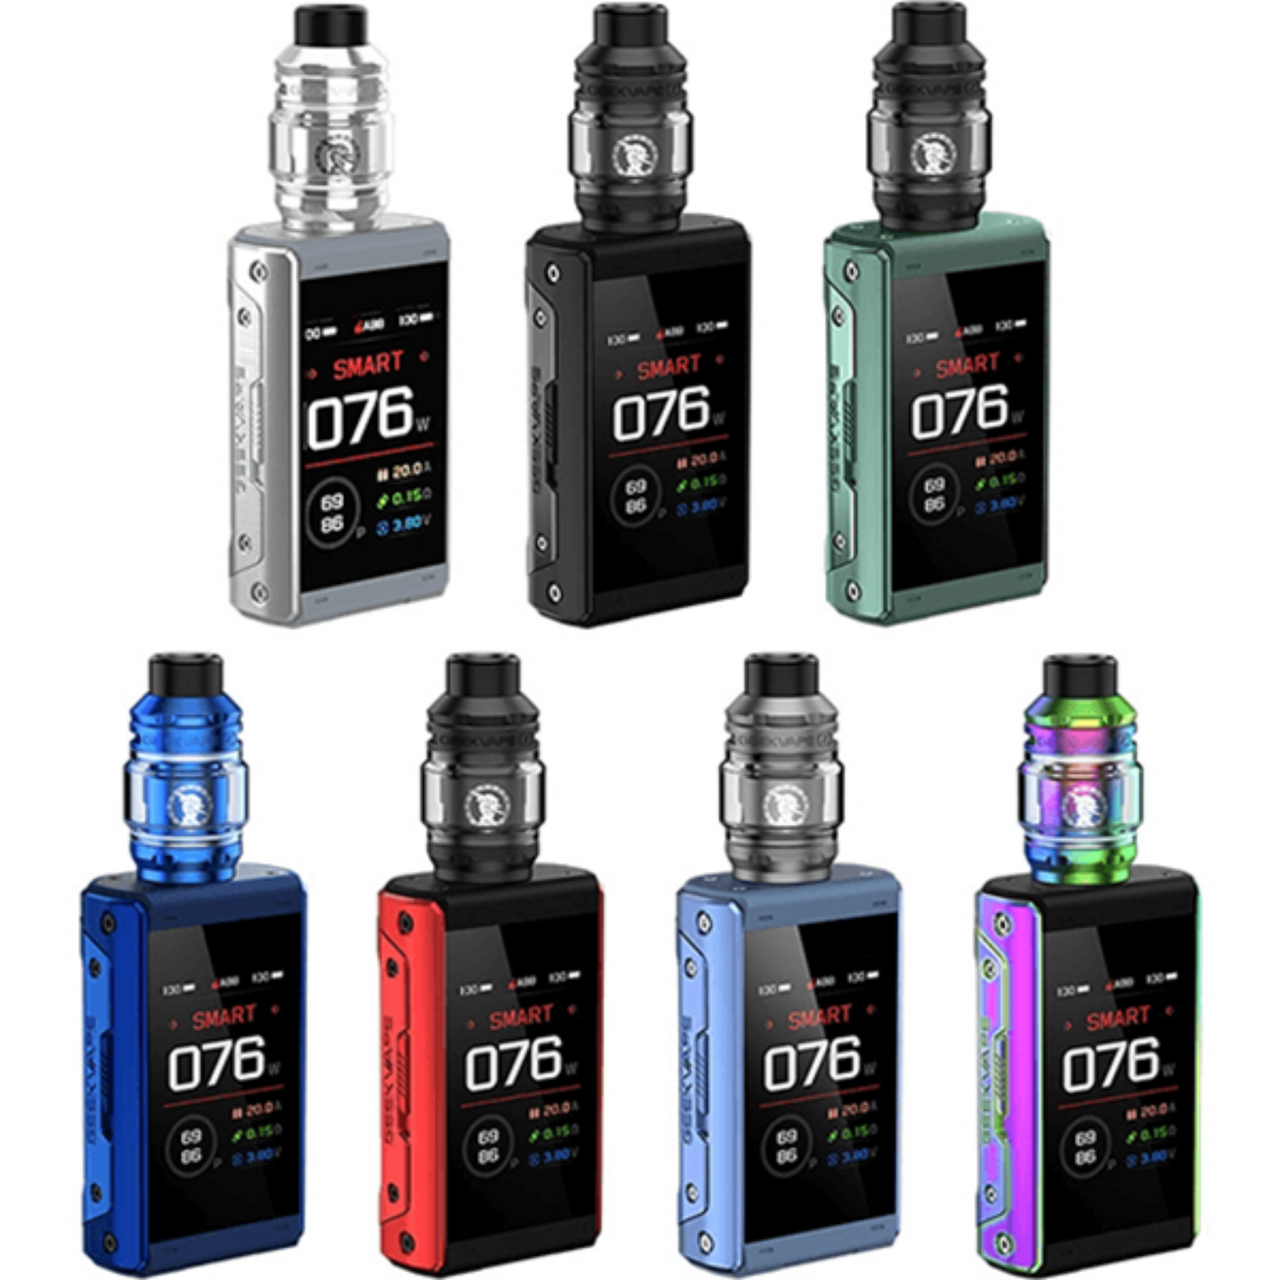 GeekVape T200 Aegis Touch 200w Kit (Claret Red)